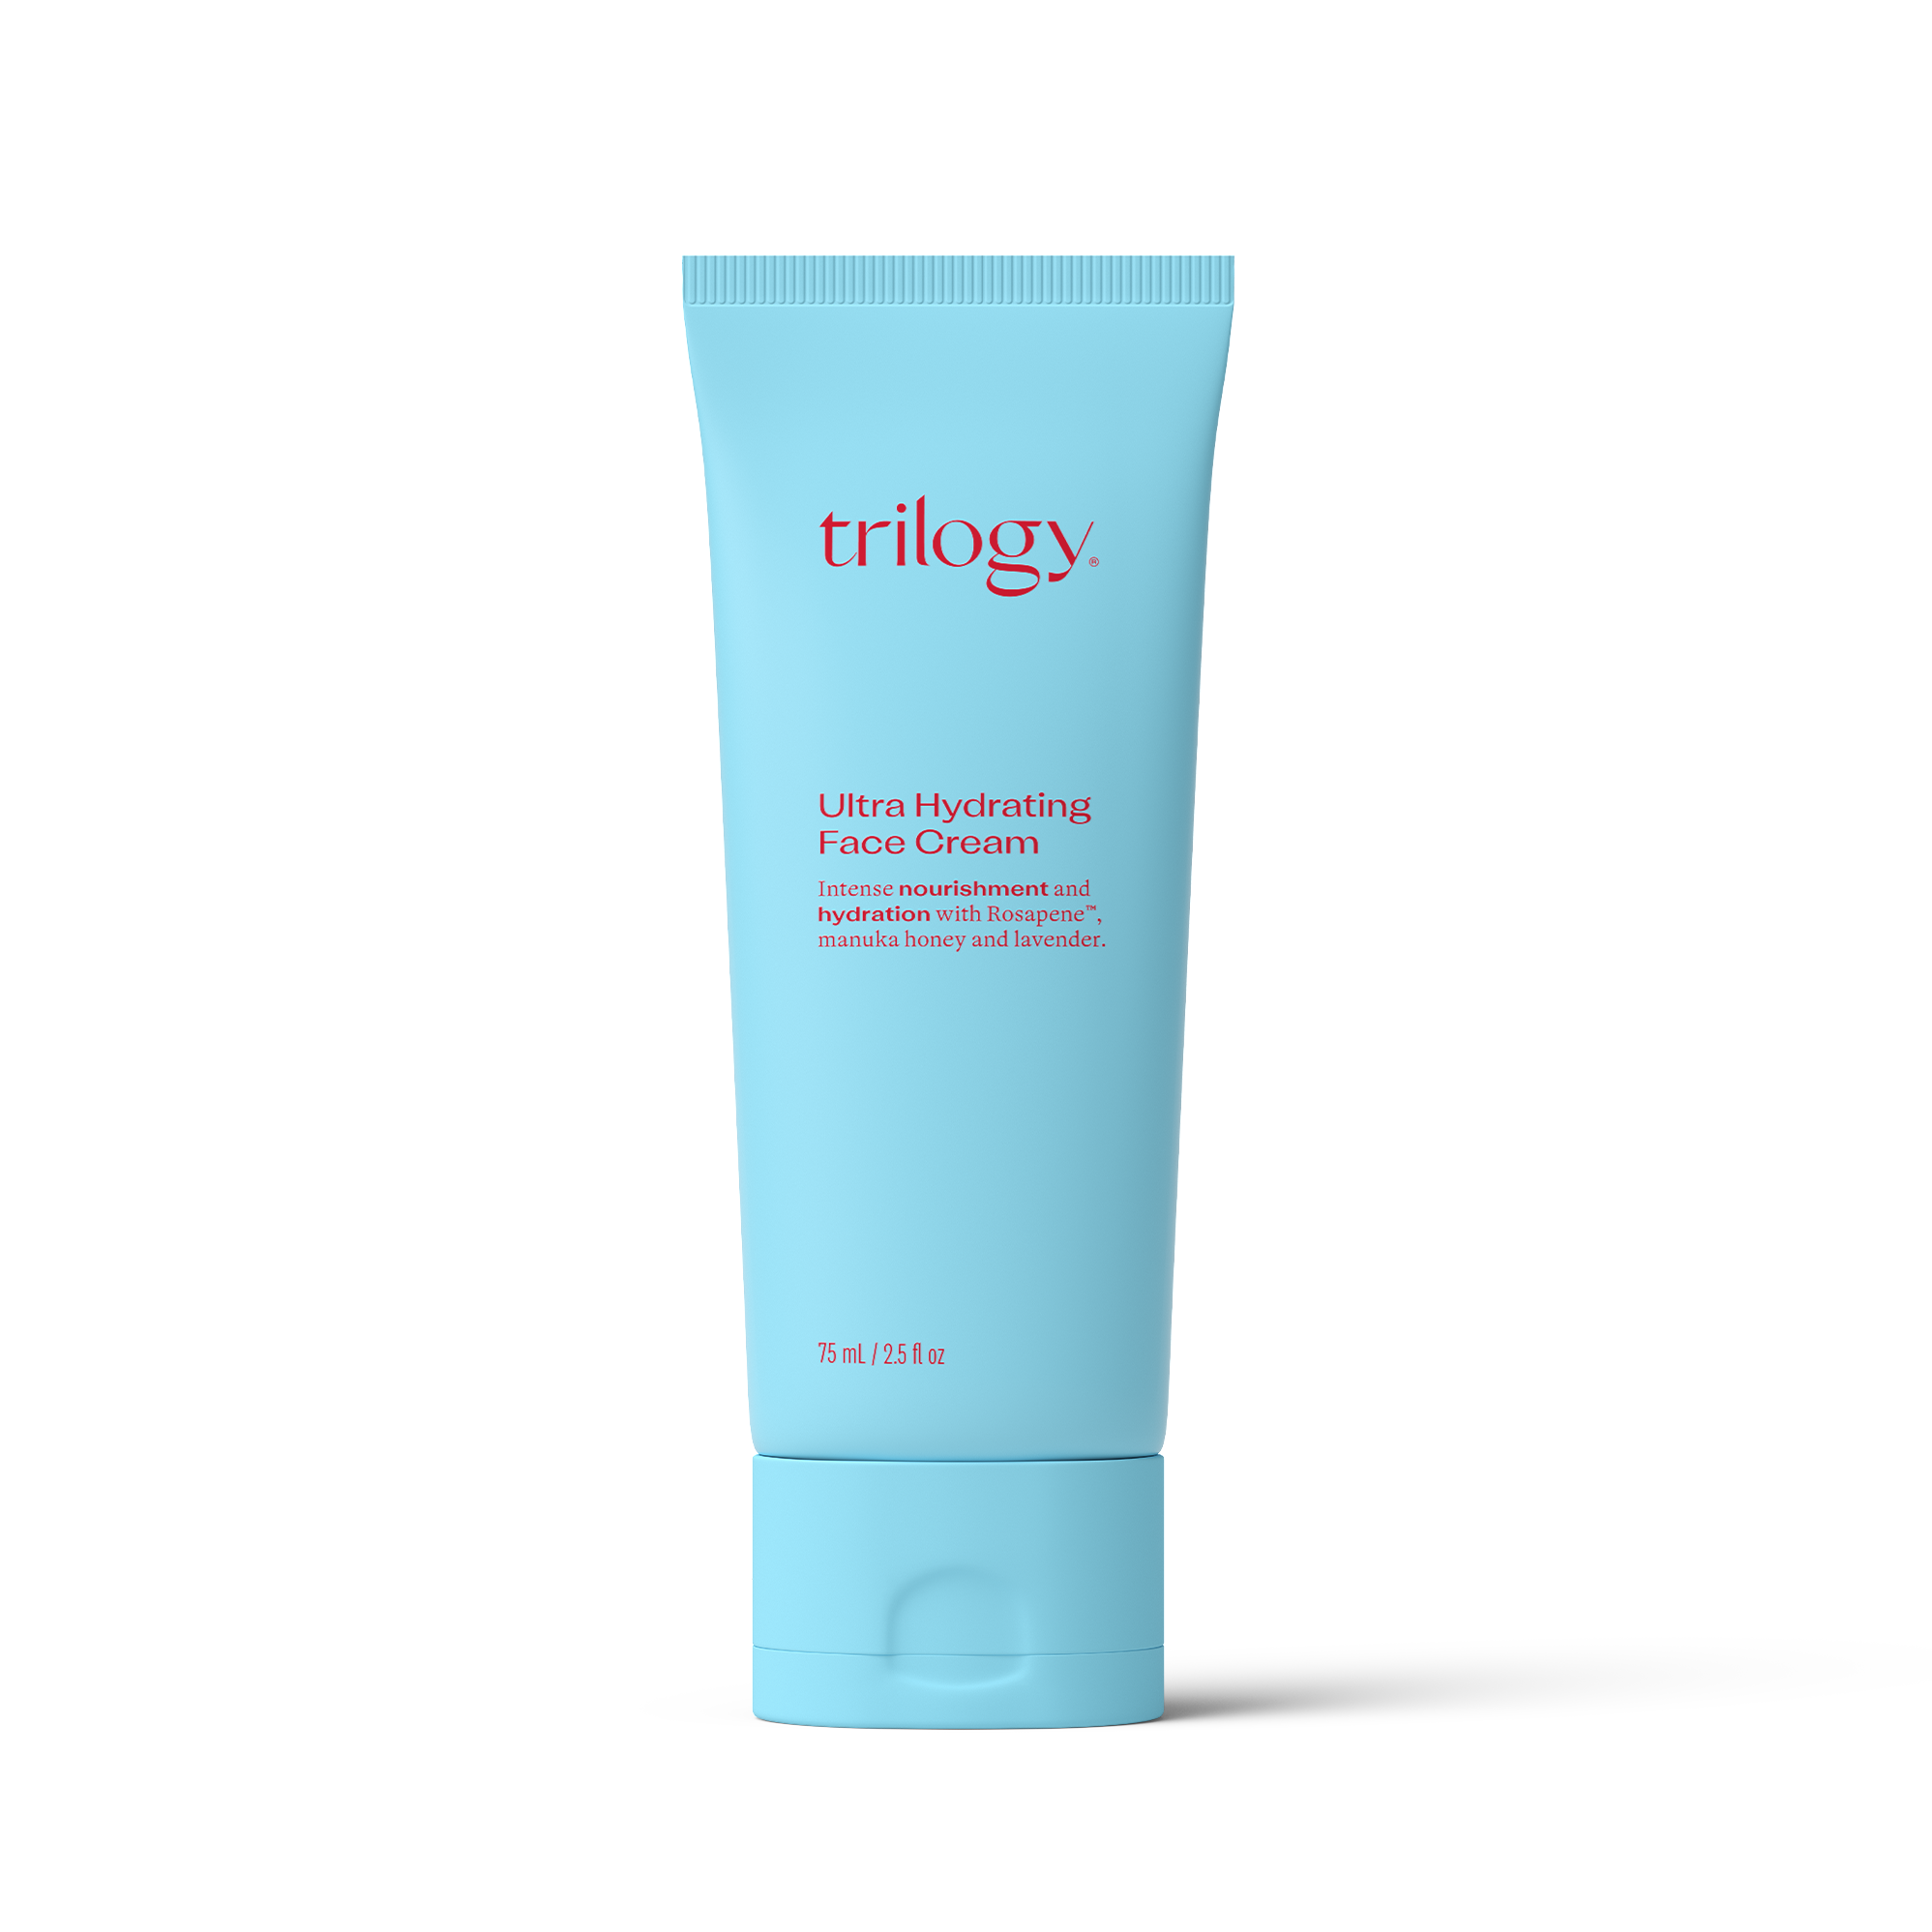 Trilogy Ultra Hydrating Face Cream (75ml) - Horans Healthstore